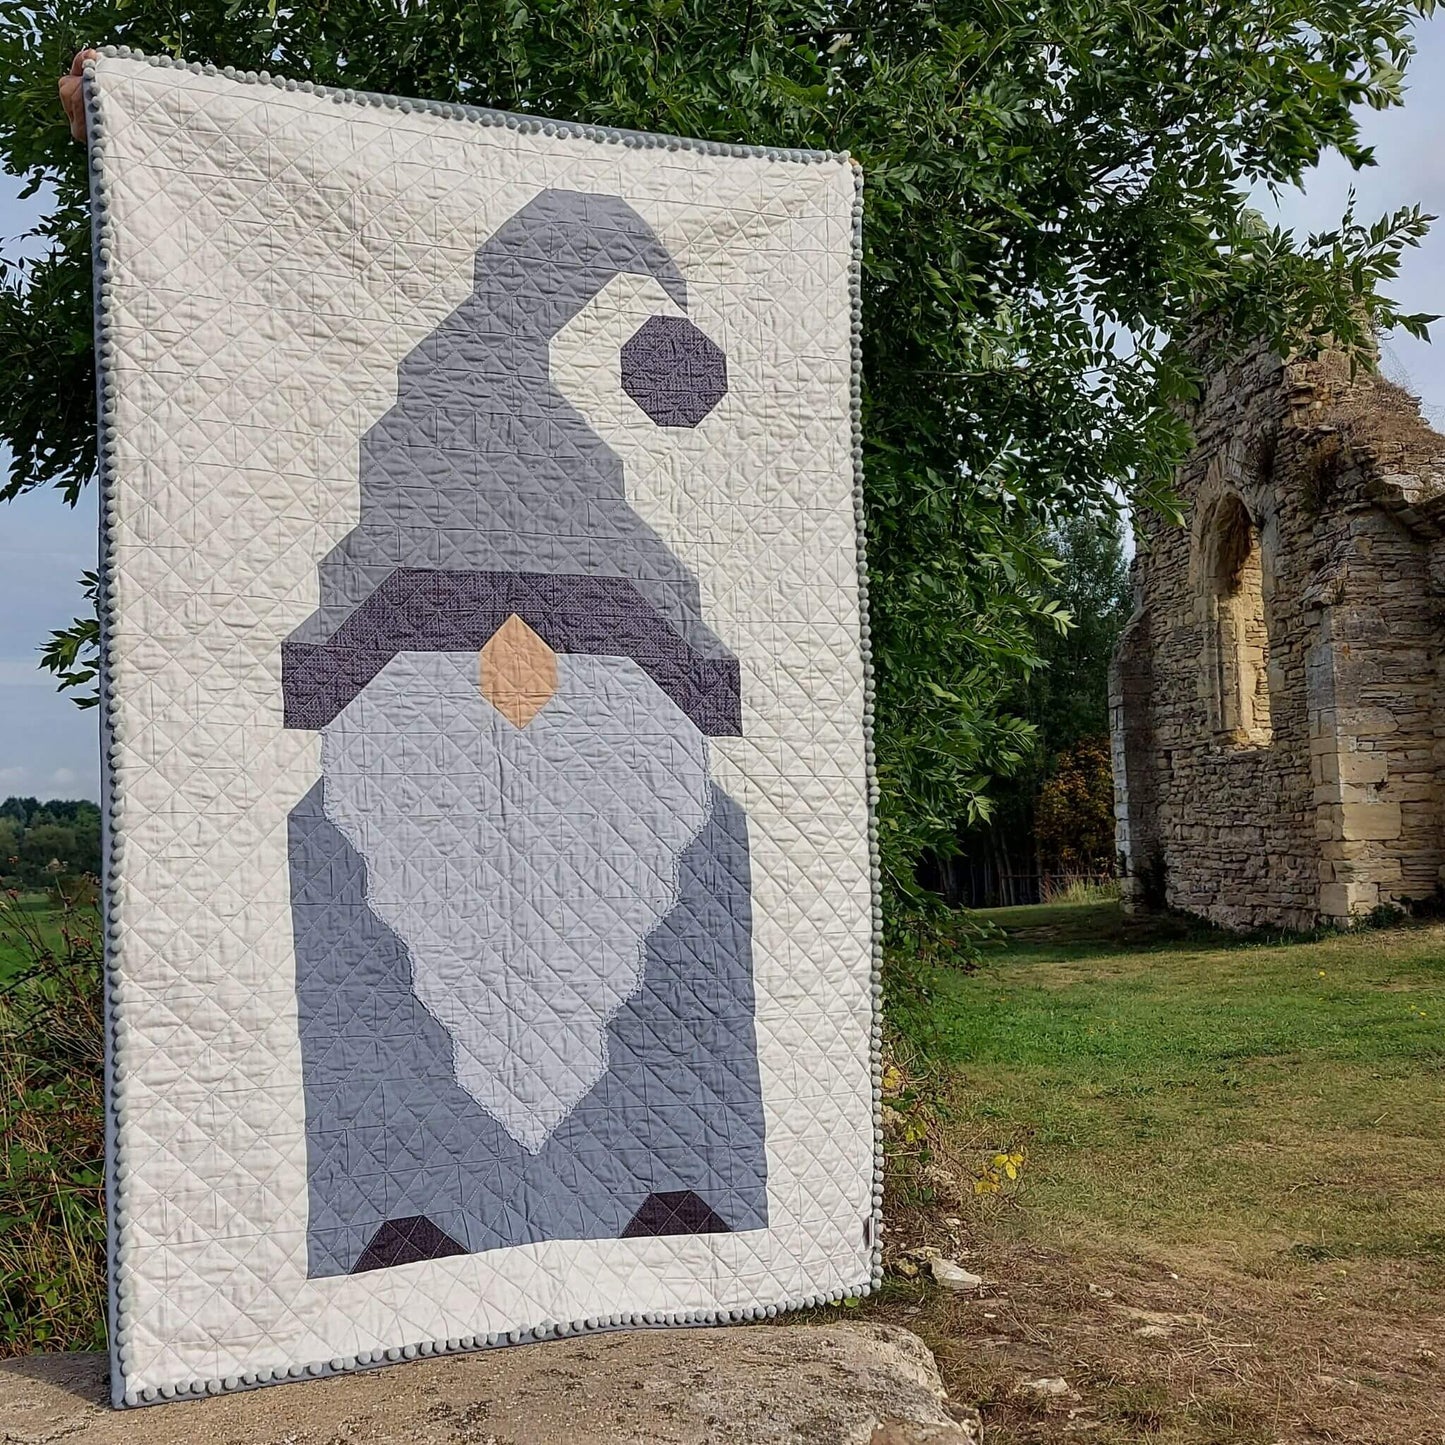 The Tomte Quilt Pattern By Tracy Perks